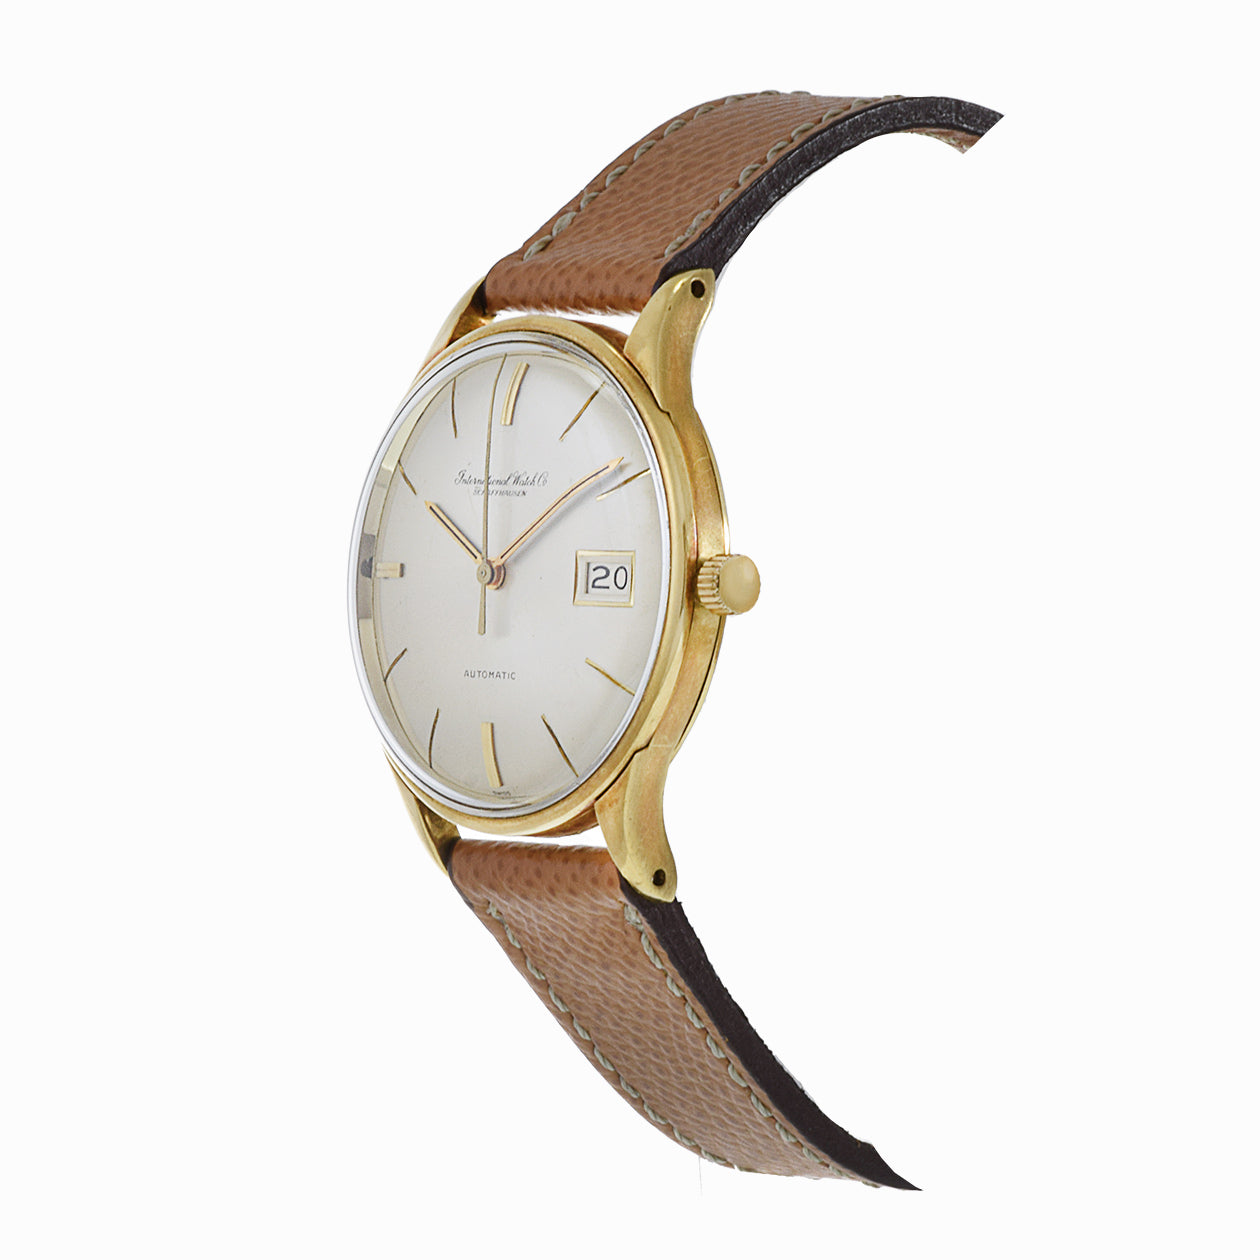 Vintage 1960's IWC 18KT Yellow Gold Automatic watch